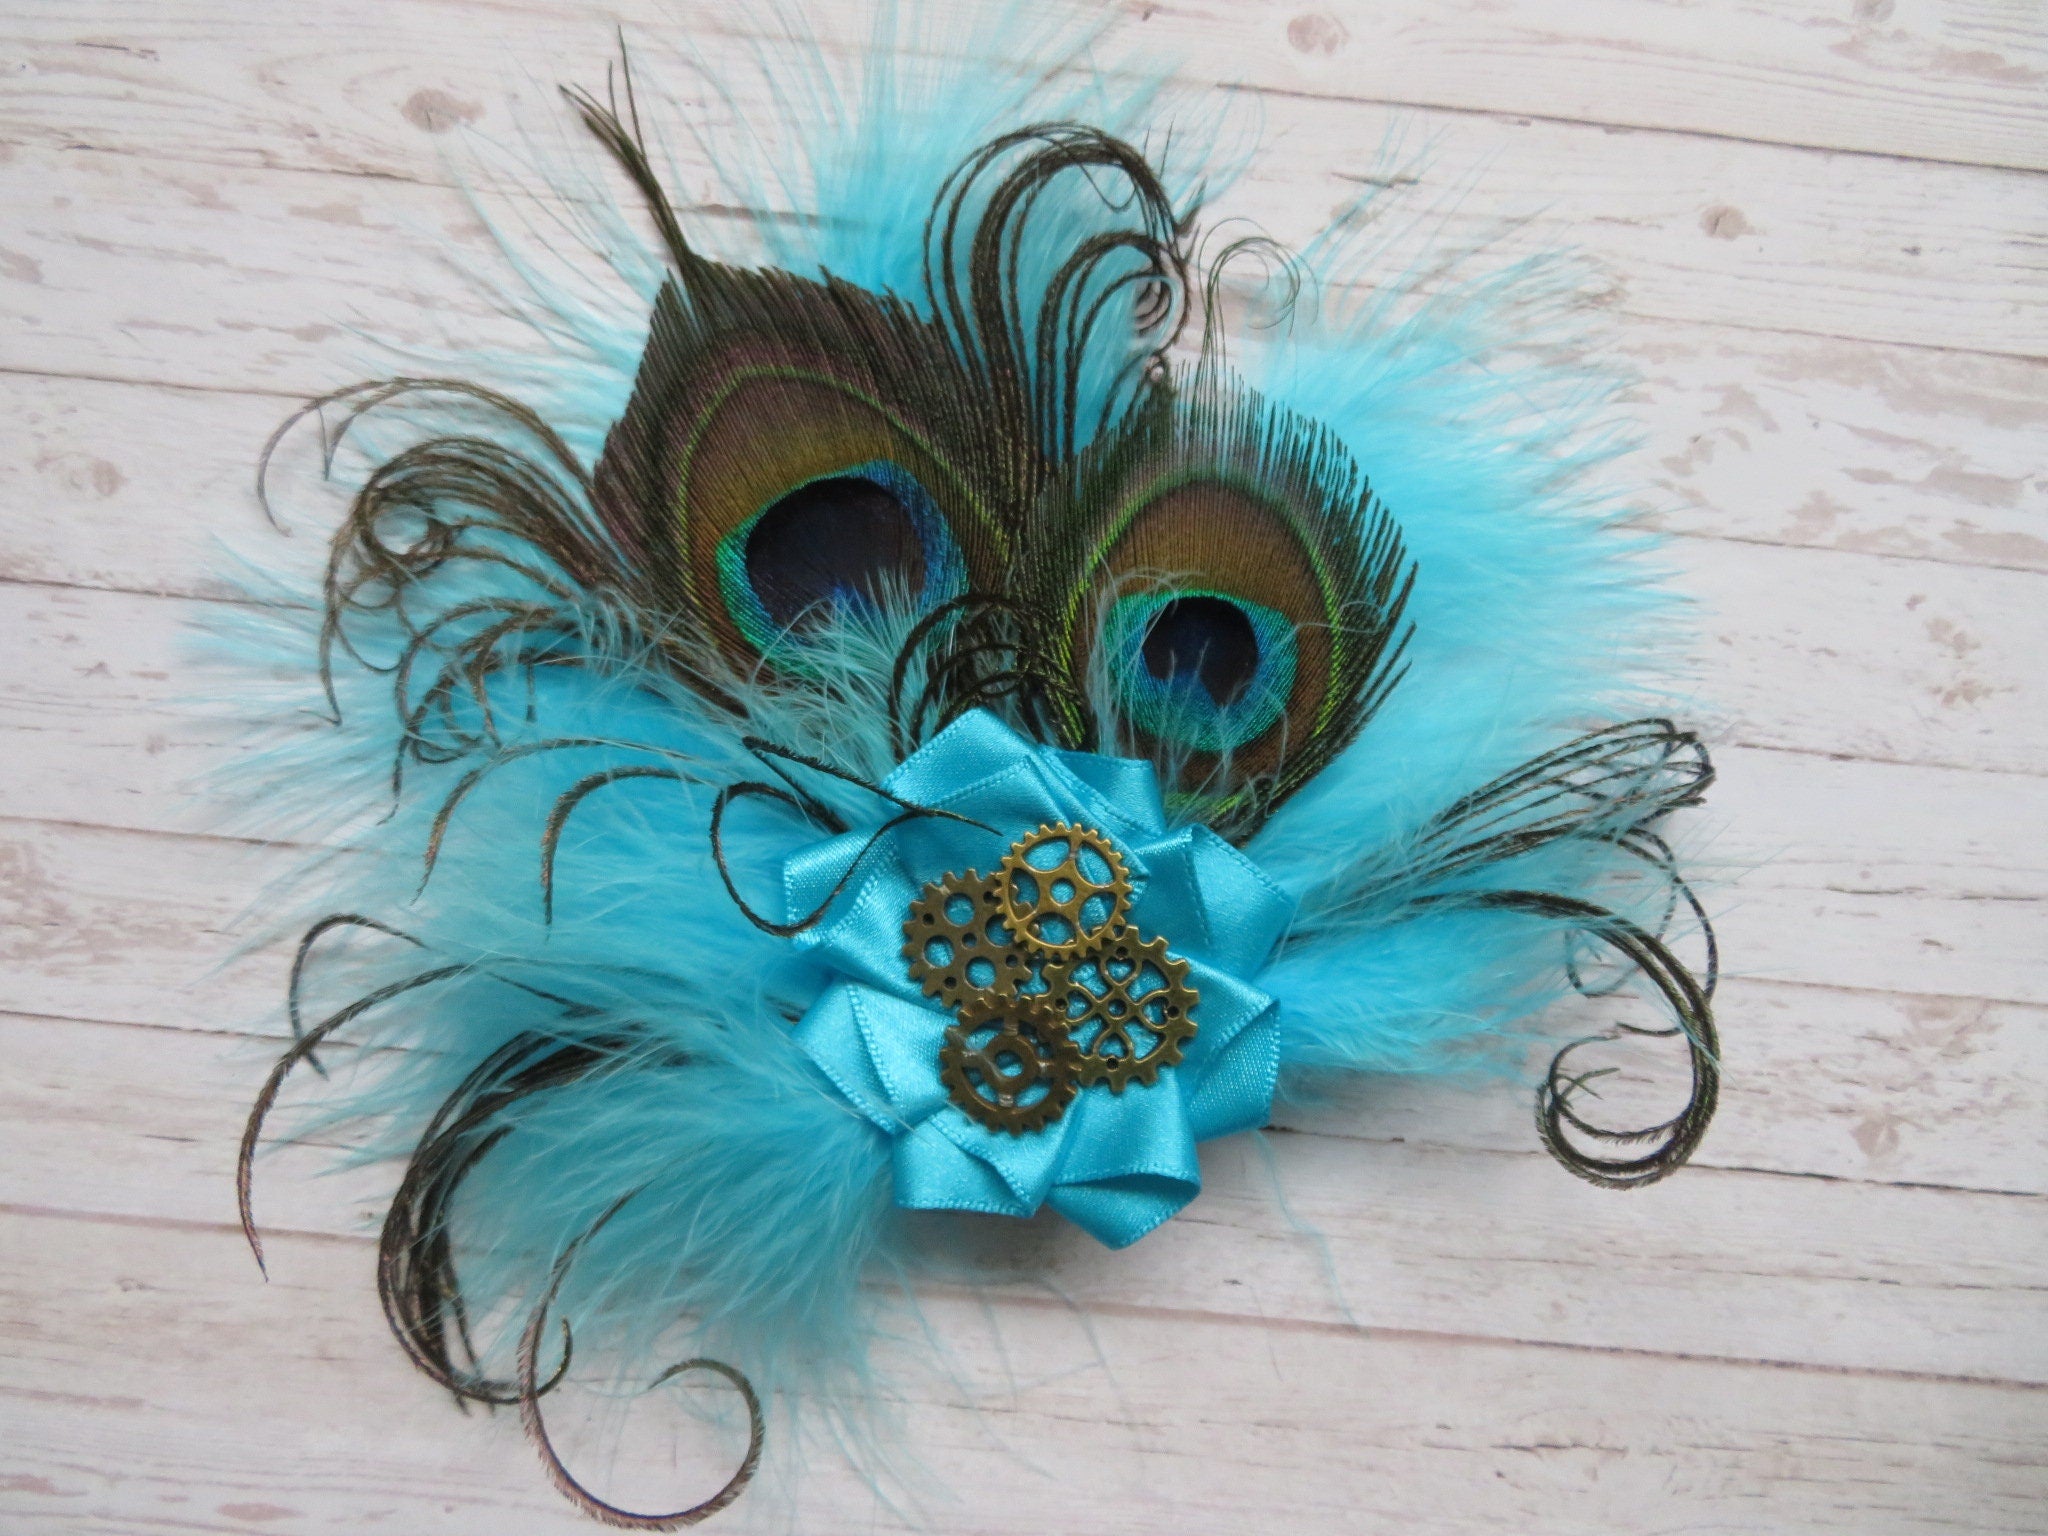 Turquoise Steampunk Fascinator Lagoon Azure Blue Peacock Feather & Brass Cogs Mini Headpiece Wedding Cosplay Hair Hat Clip- Made to Order